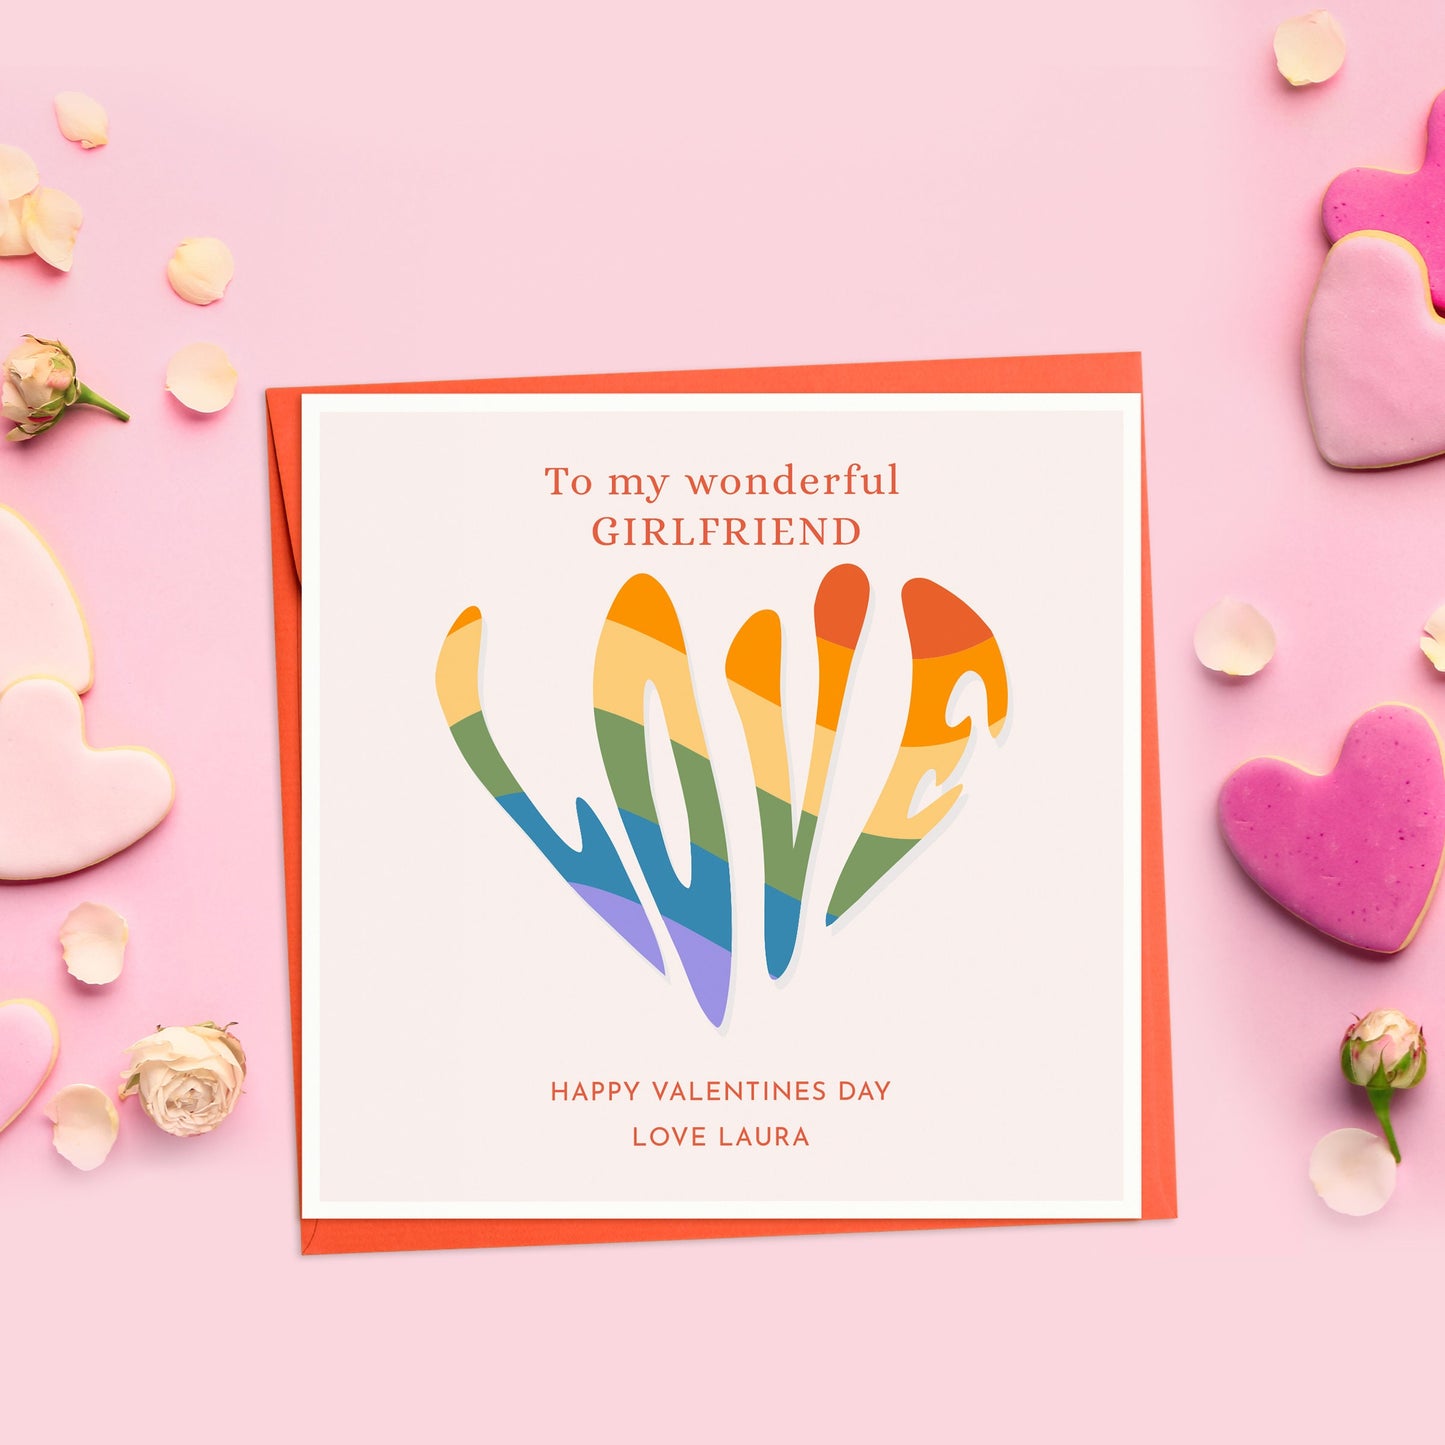 Love Rainbow Valentine's Day Card, Personalised Valentines Gay Card, Boyfriend or Girlfriend Valentines Day Card, LGBQT Valentines Card